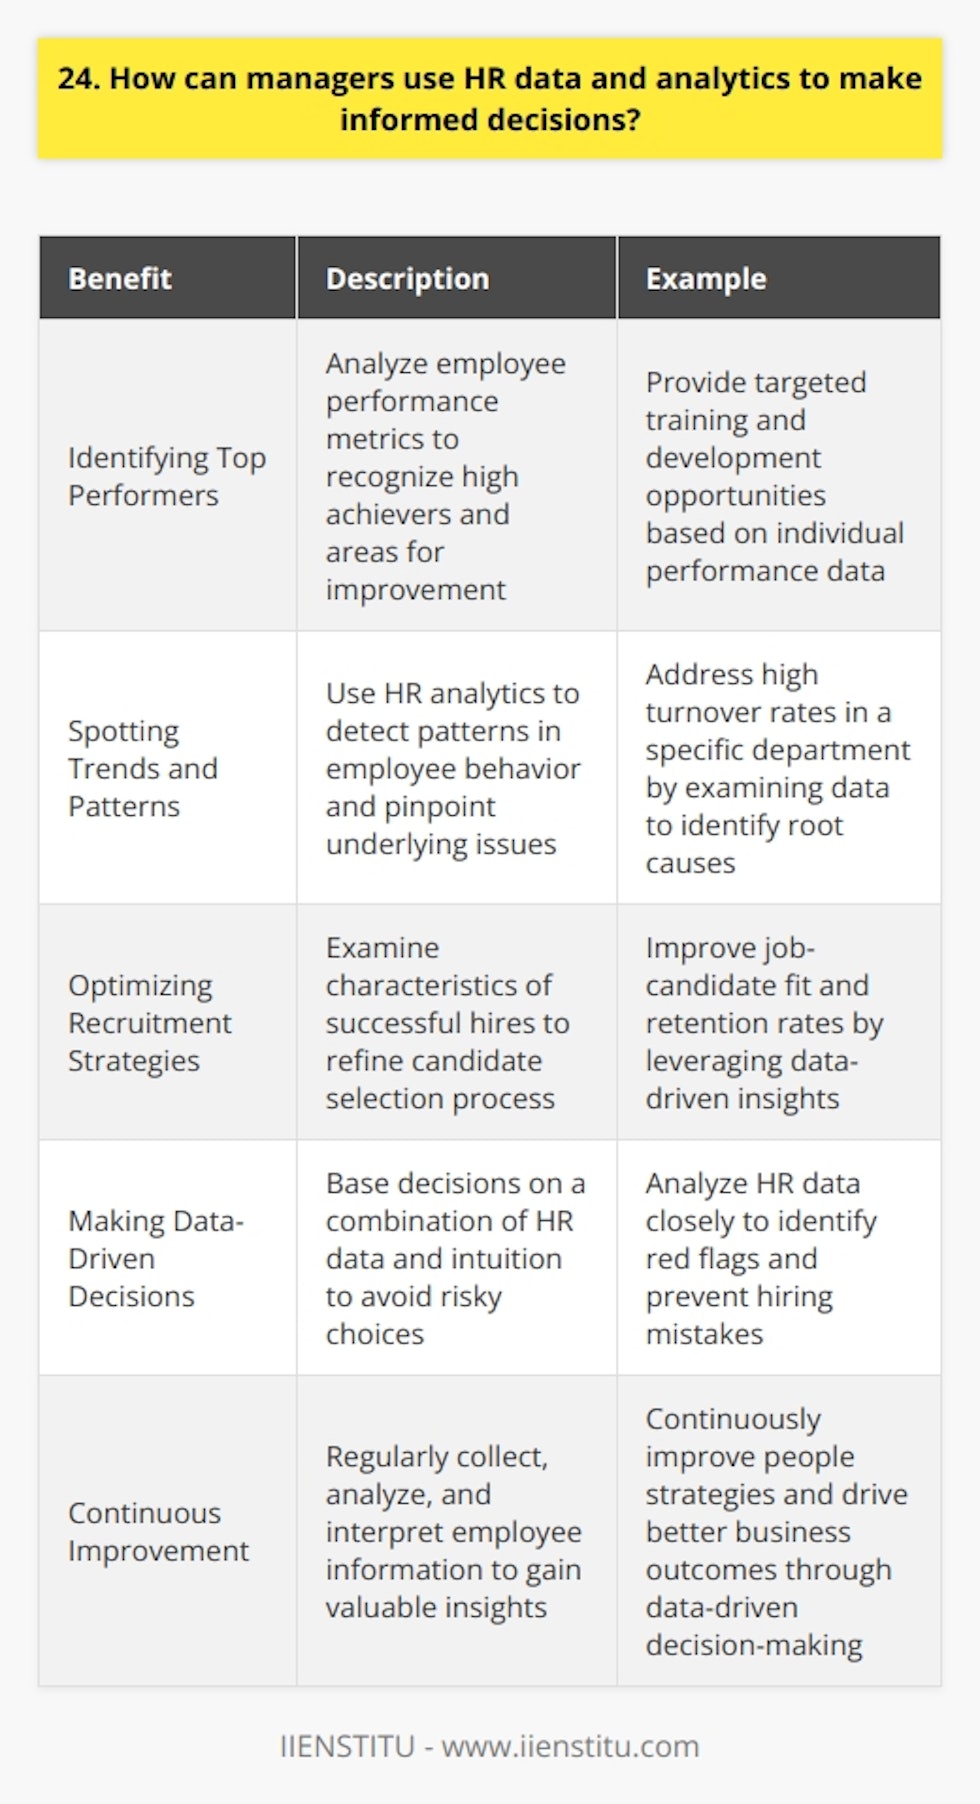 As a manager, leveraging HR data and analytics is crucial for making informed decisions. By analyzing employee performance metrics, you can identify top performers and areas for improvement. This allows you to provide targeted training and development opportunities. Identifying Trends and Patterns HR analytics can also help you spot trends and patterns in employee behavior. For instance, high turnover rates in a particular department may indicate underlying issues that need addressing. By diving into the data, you can pinpoint the root causes and take corrective action. Enhancing Recruitment Strategies Moreover, HR data is invaluable for optimizing your recruitment strategies. By examining the characteristics of successful hires, you can refine your candidate selection process. This leads to better job-candidate fit and improved retention rates. Making Data-Driven Decisions In my experience, relying on gut instinct alone can be risky. I once hired a candidate who seemed perfect on paper but struggled to fit into our company culture. If I had analyzed our HR data more closely, I might have noticed red flags and avoided that mistake. Since then, Ive learned to base my decisions on a combination of data and intuition. By leveraging HR analytics, I can make more objective and informed choices that benefit both my team and the organization as a whole. Continuous Improvement Of course, using HR data effectively is an ongoing process. It requires regularly collecting, analyzing, and interpreting employee information. But the insights gained are well worth the effort. They enable managers to continuously improve their people strategies and drive better business outcomes.